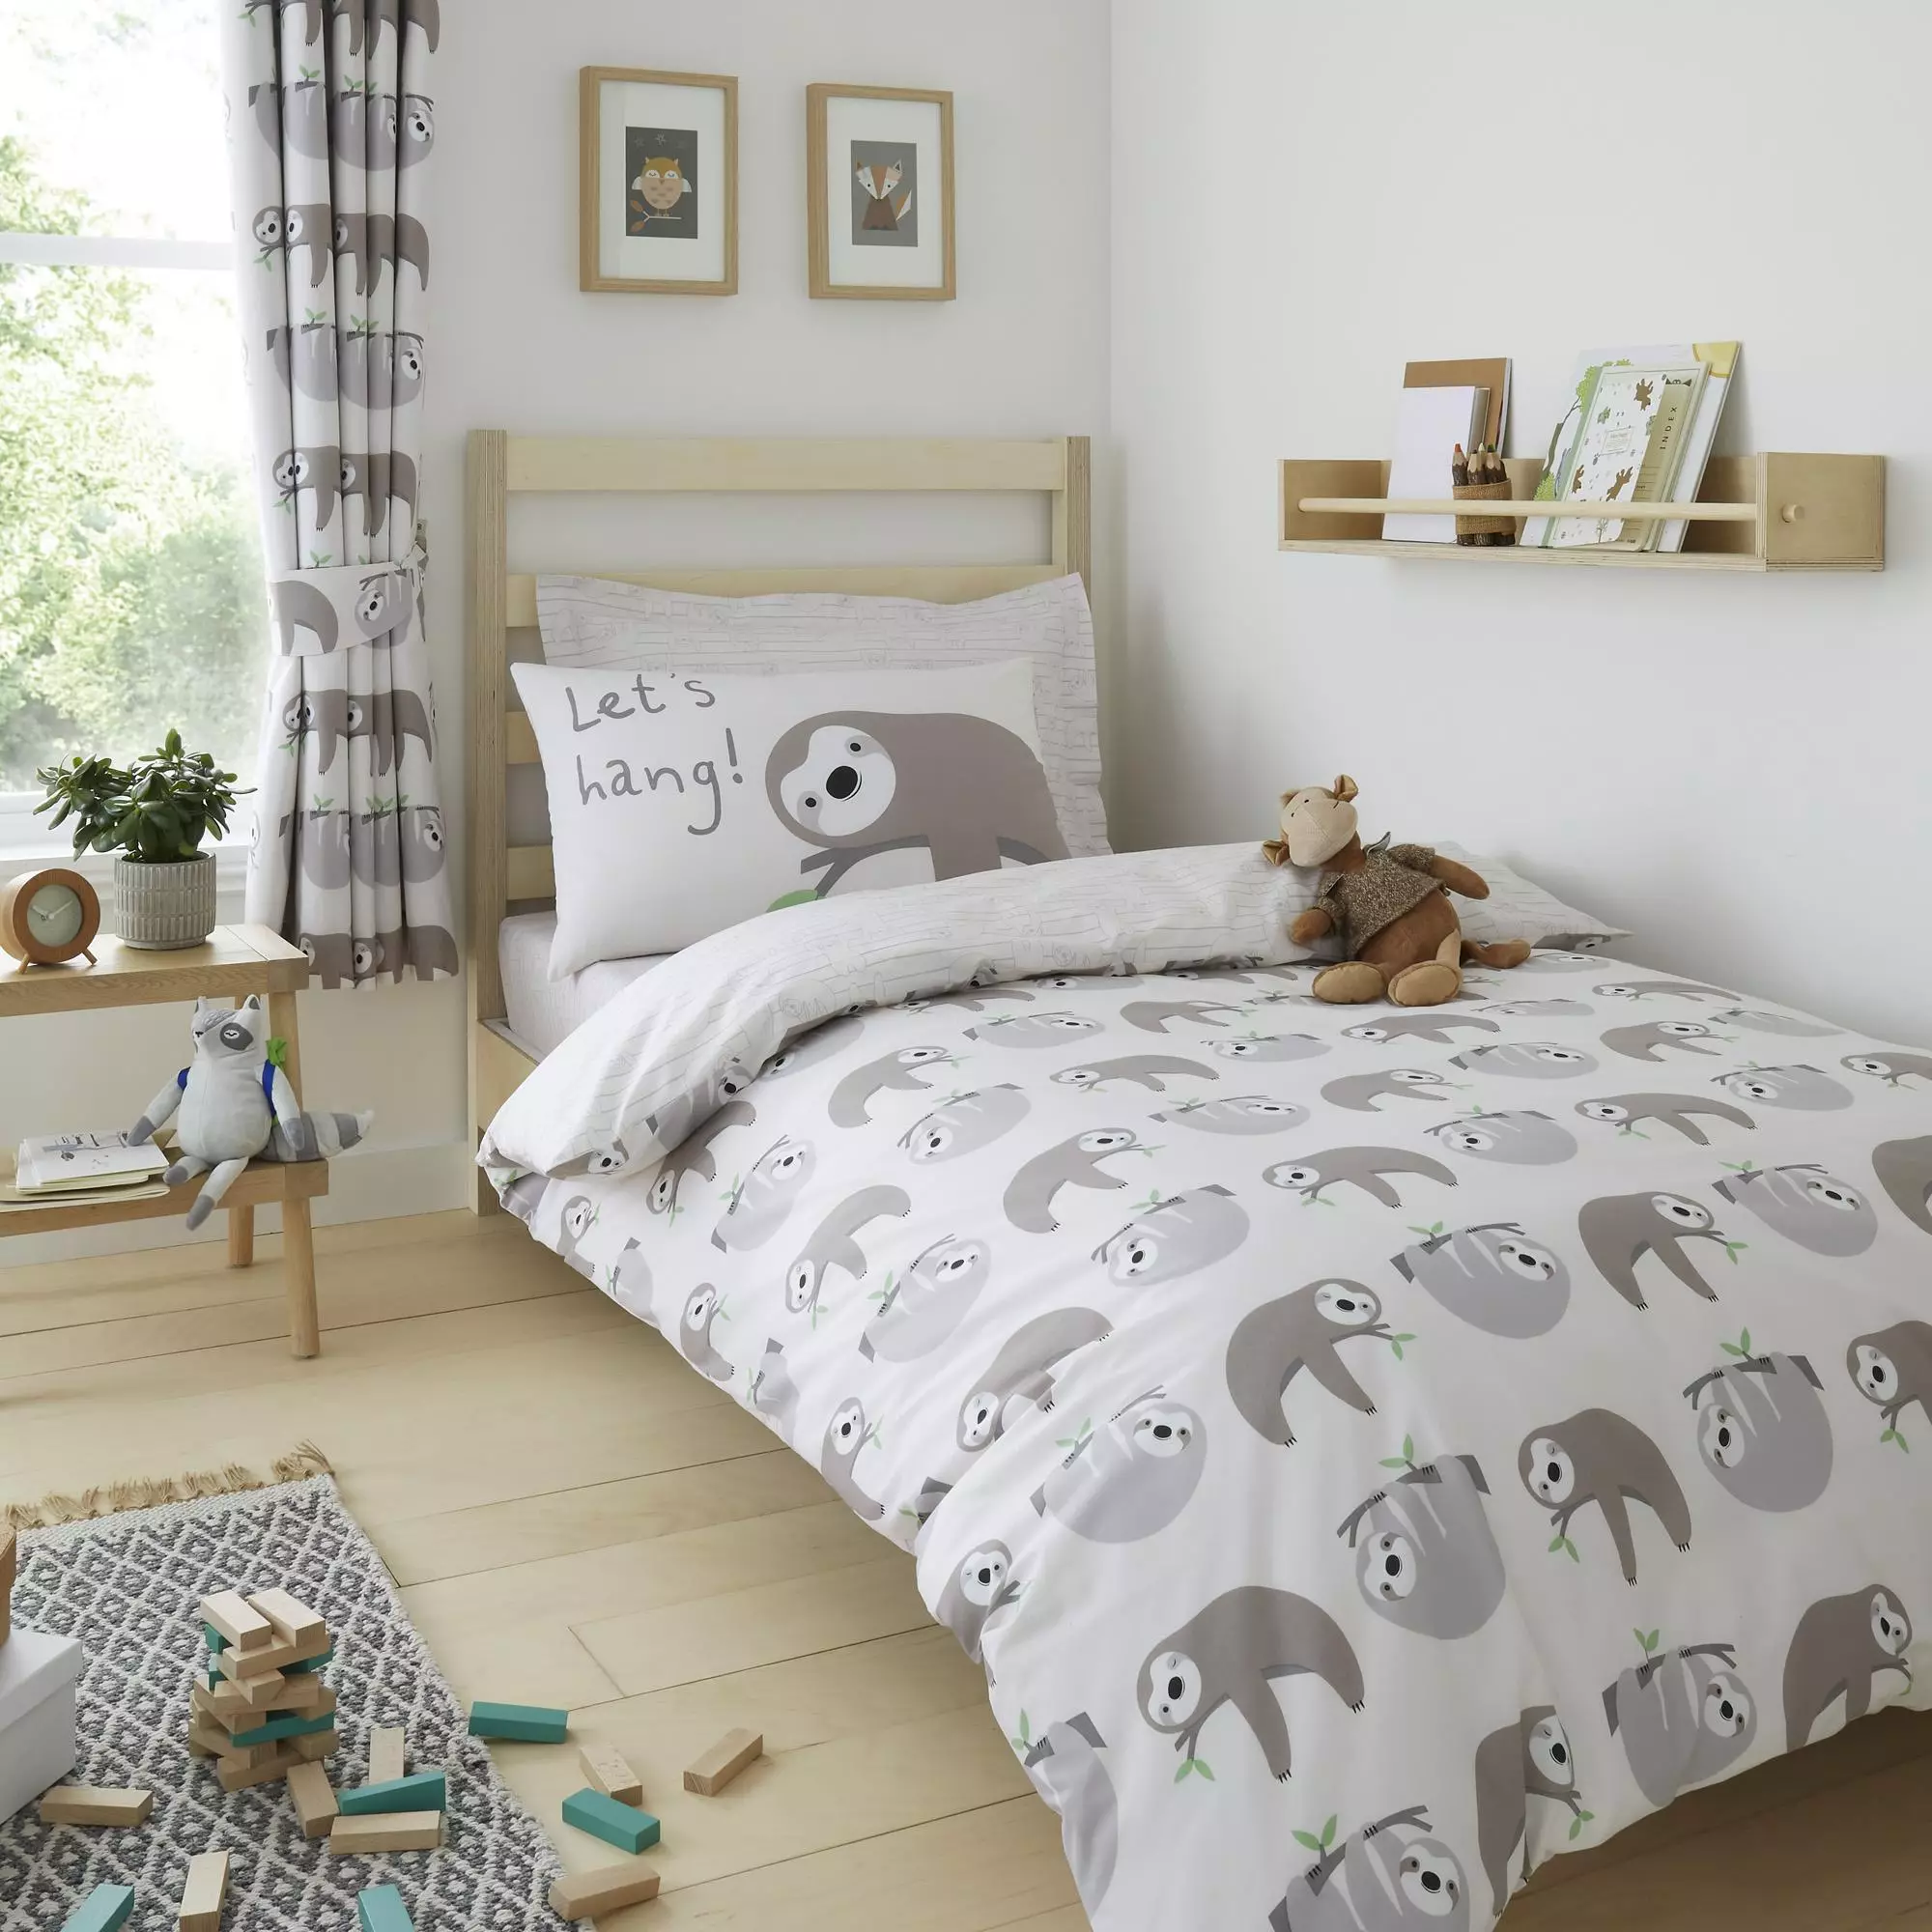 Dunelm's sloth range is available in stores